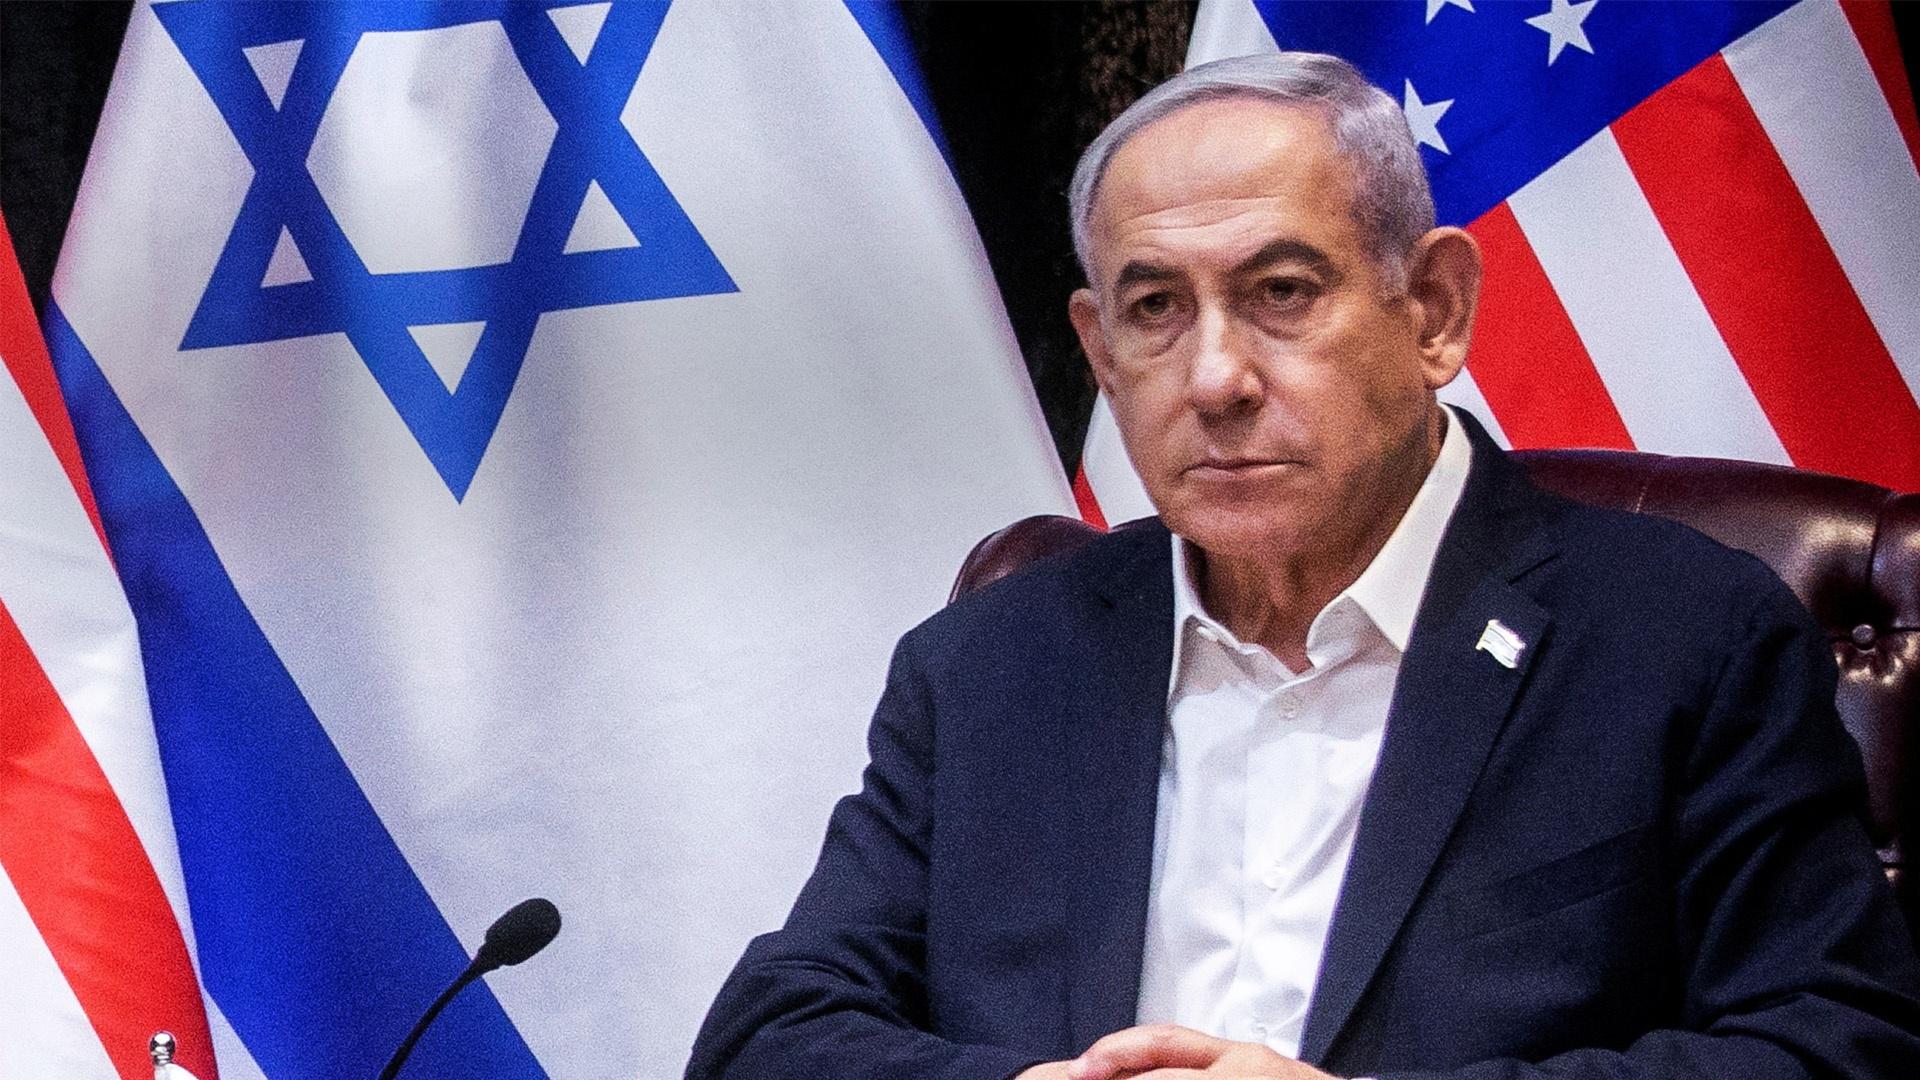 A photo of Benjamin Netanyahu - an older white male with short gray hair wearing a dark sports jacket and white collared shirt